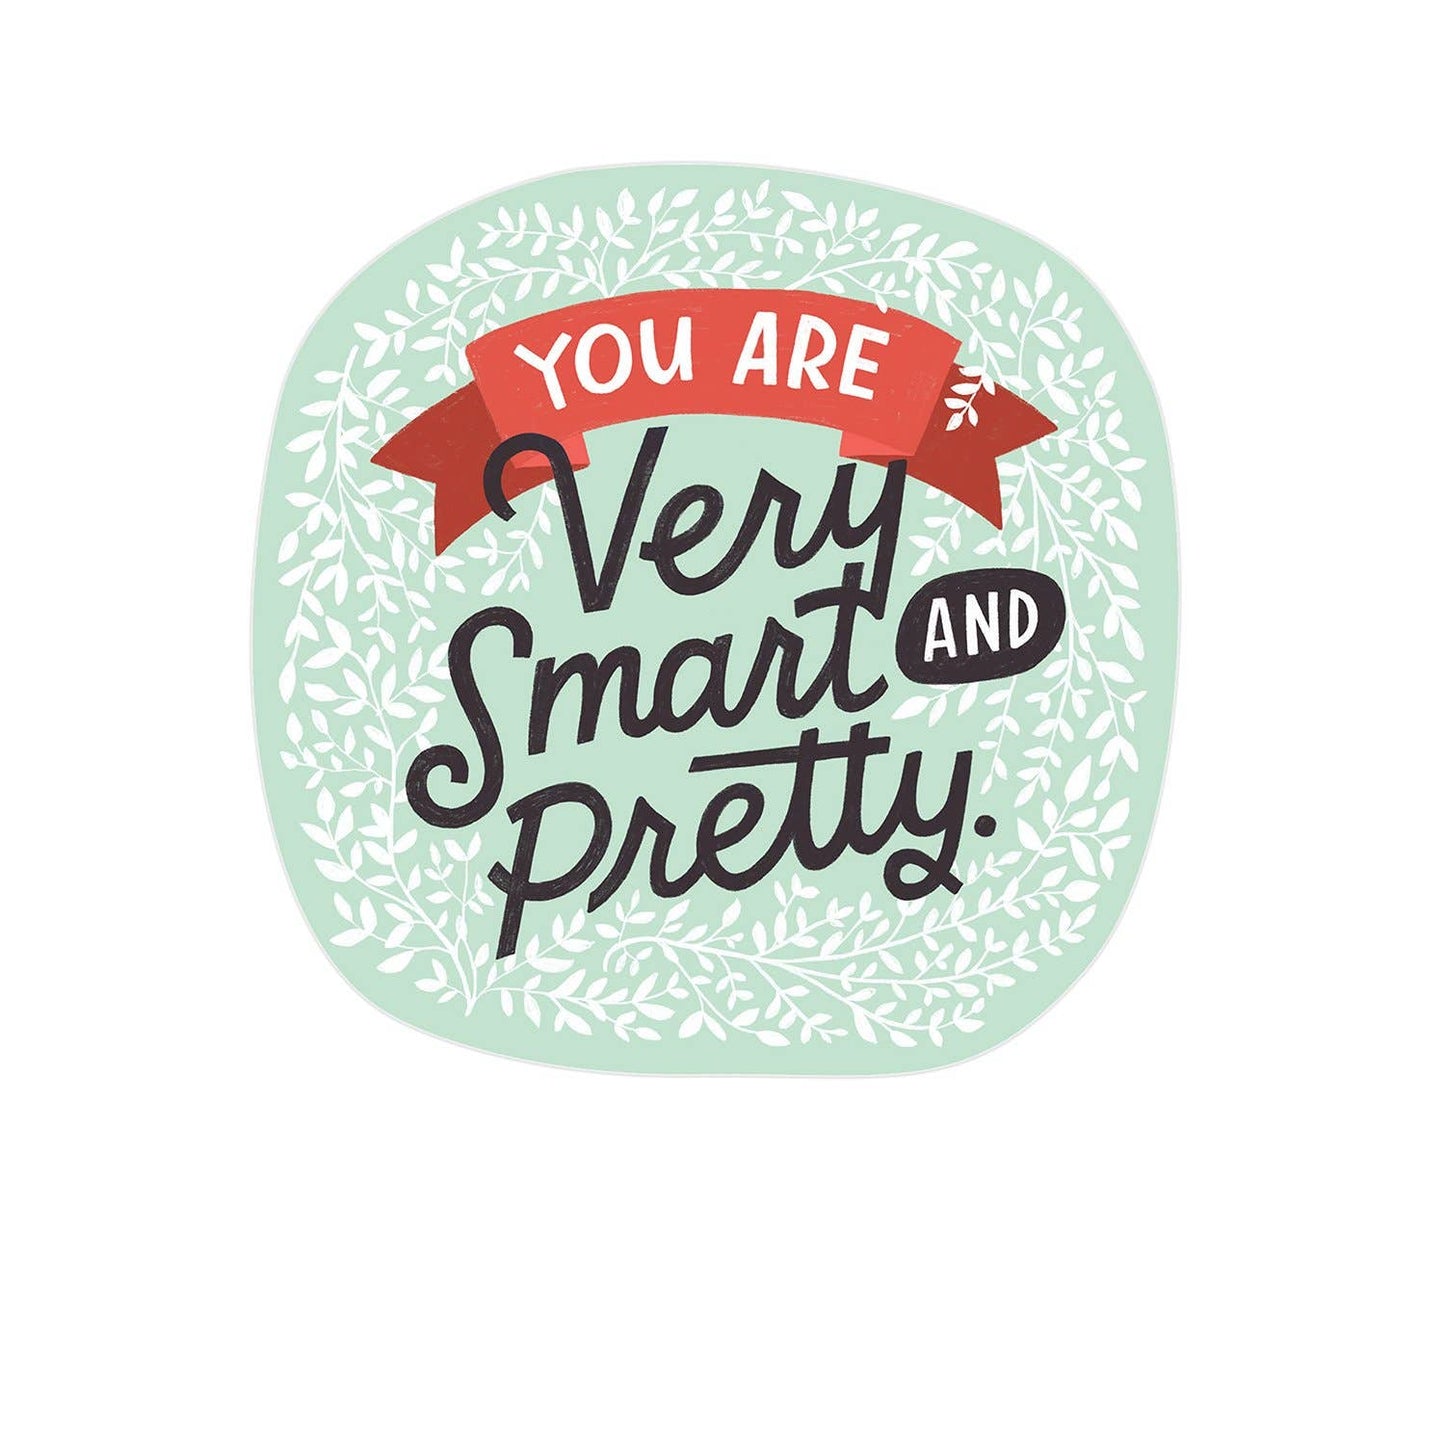 You Are Very Smart and Pretty Birthday Sticker Card